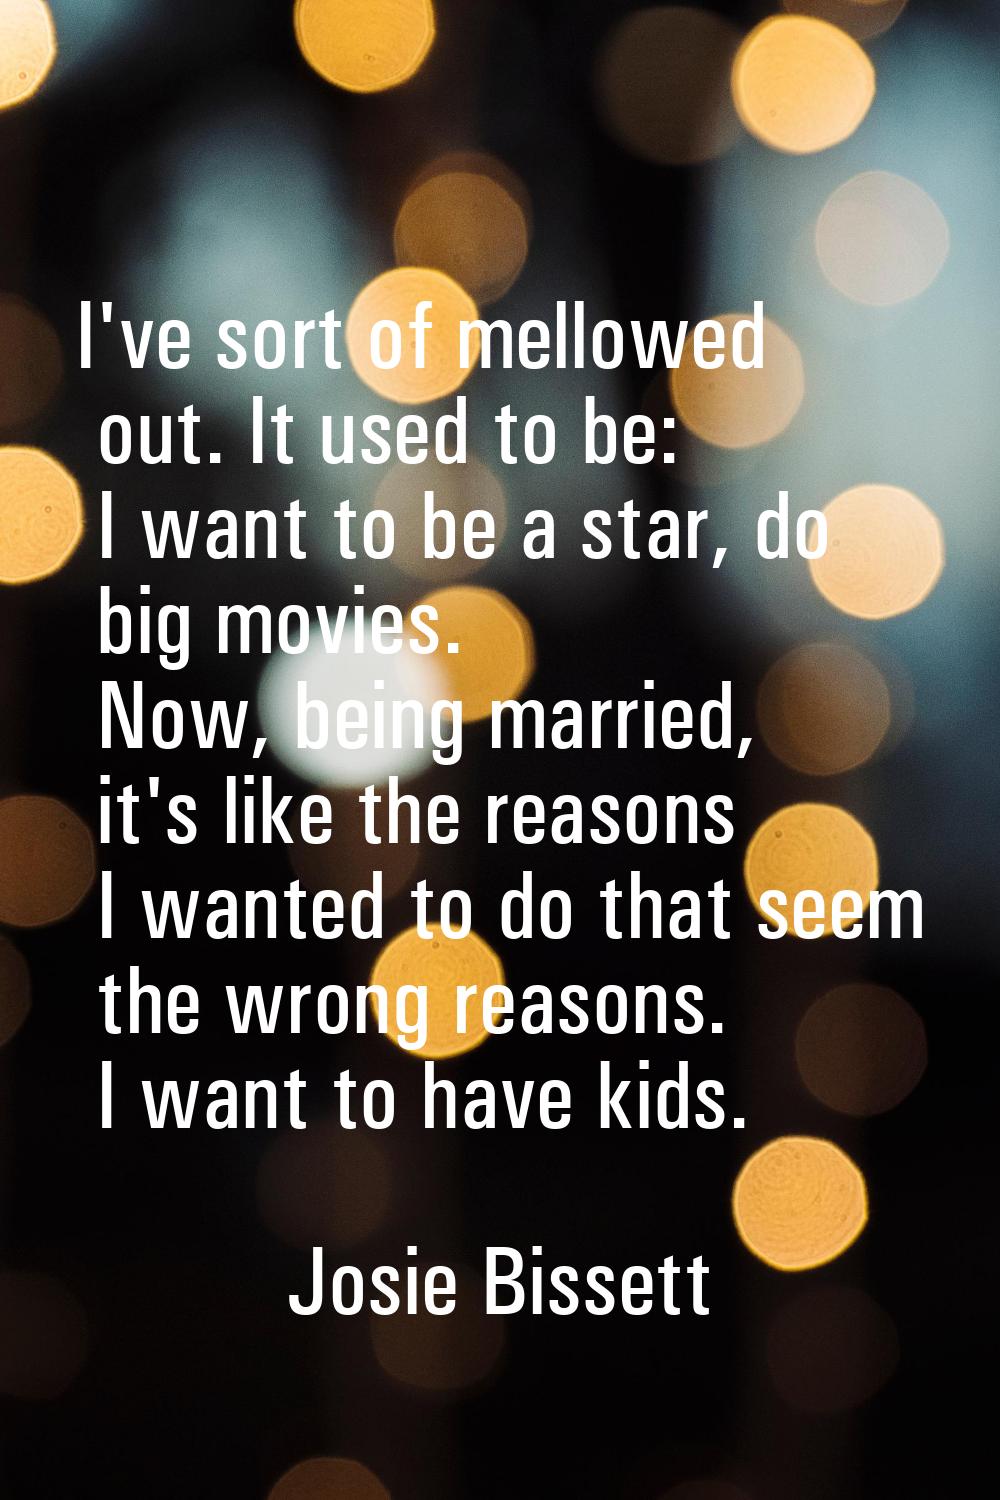 I've sort of mellowed out. It used to be: I want to be a star, do big movies. Now, being married, i